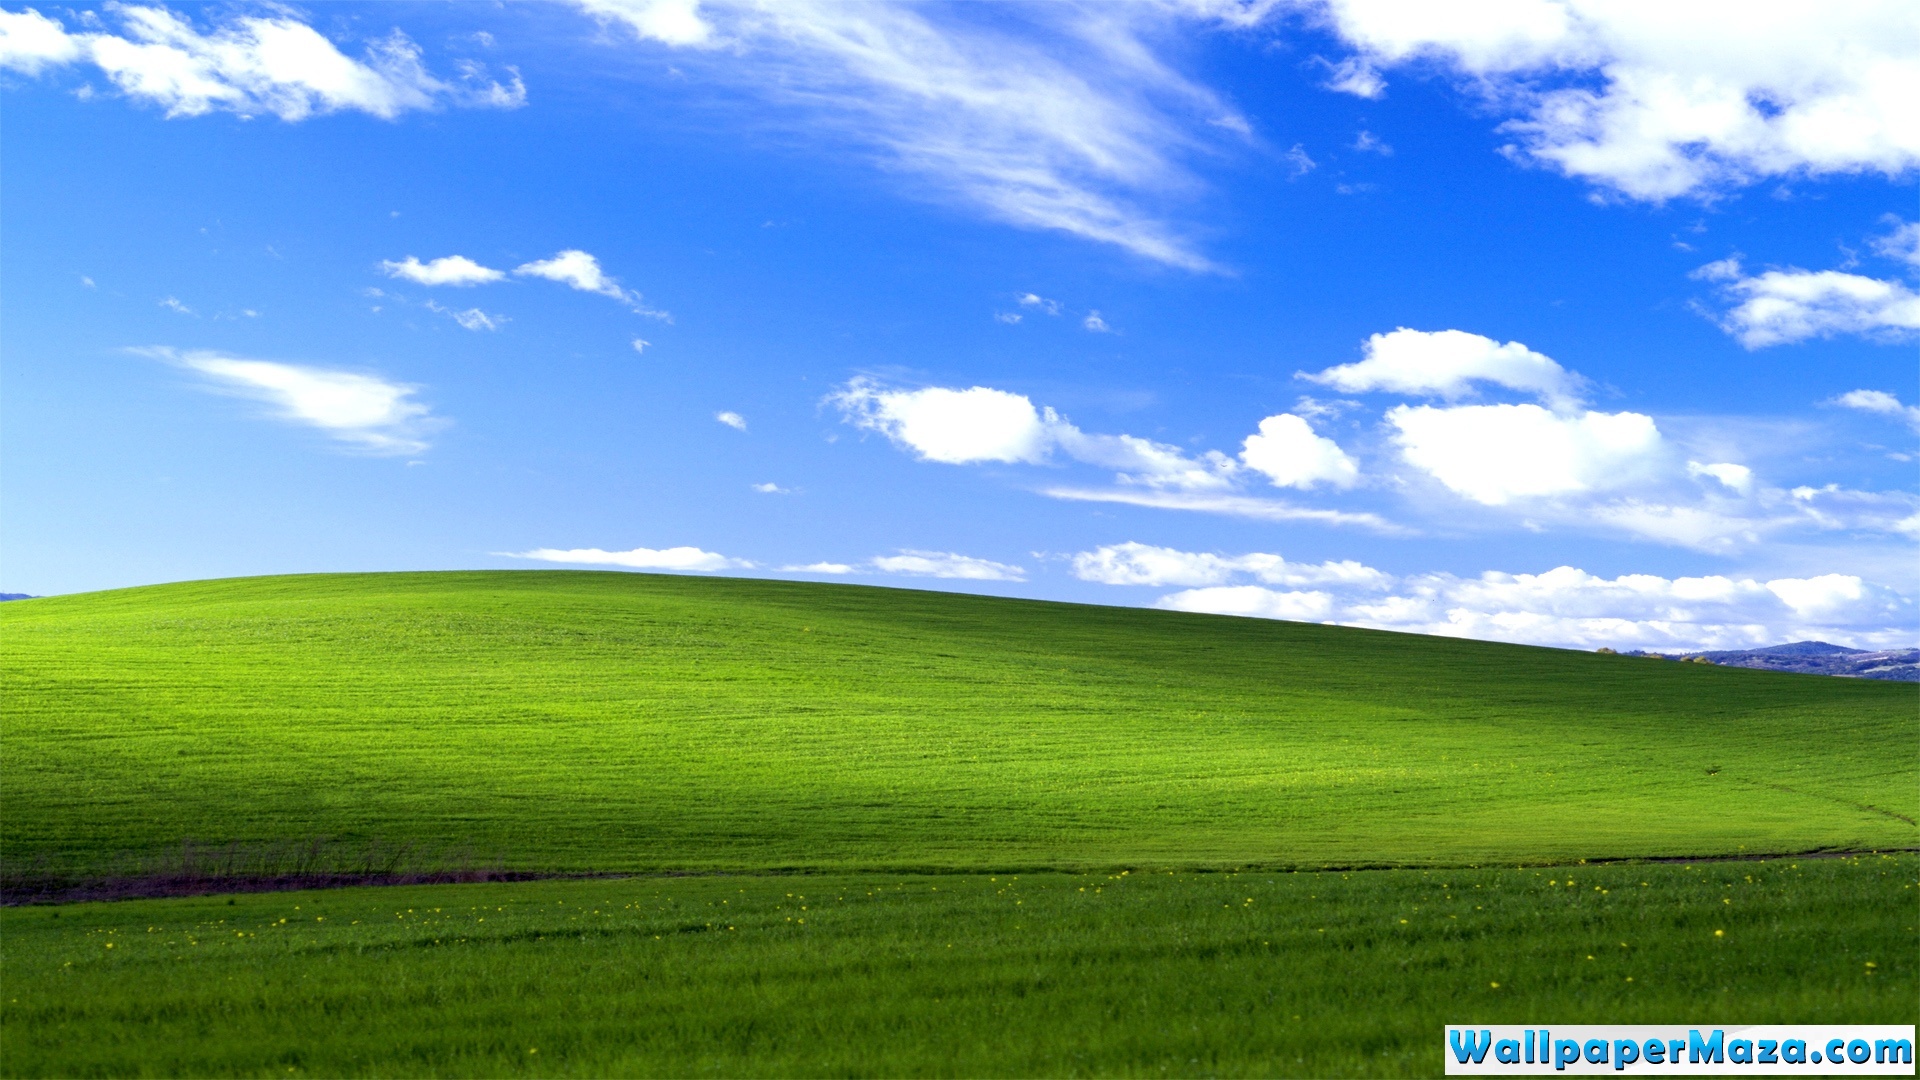 To Save Wallpaper On Your Desktop In Os Or Right Click